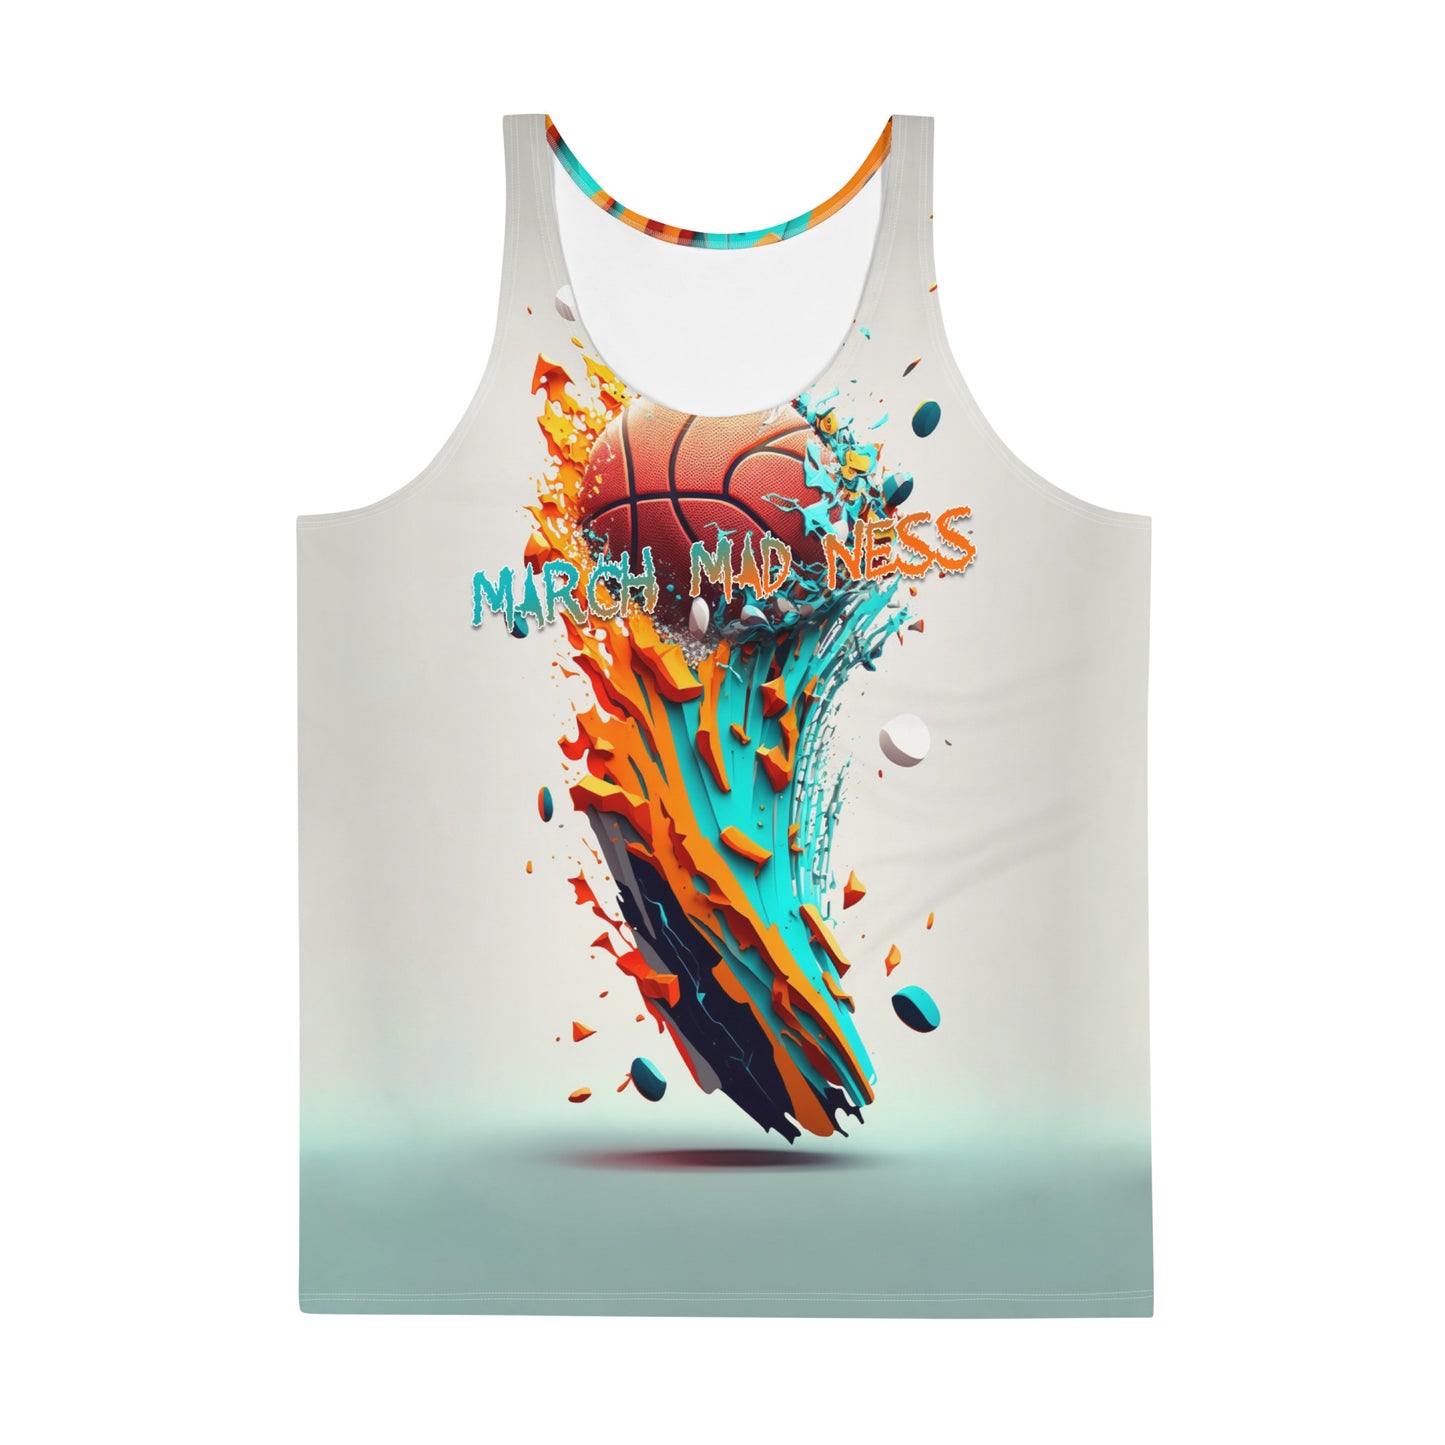 March Mad Ness 3 - Unisex Tank Top